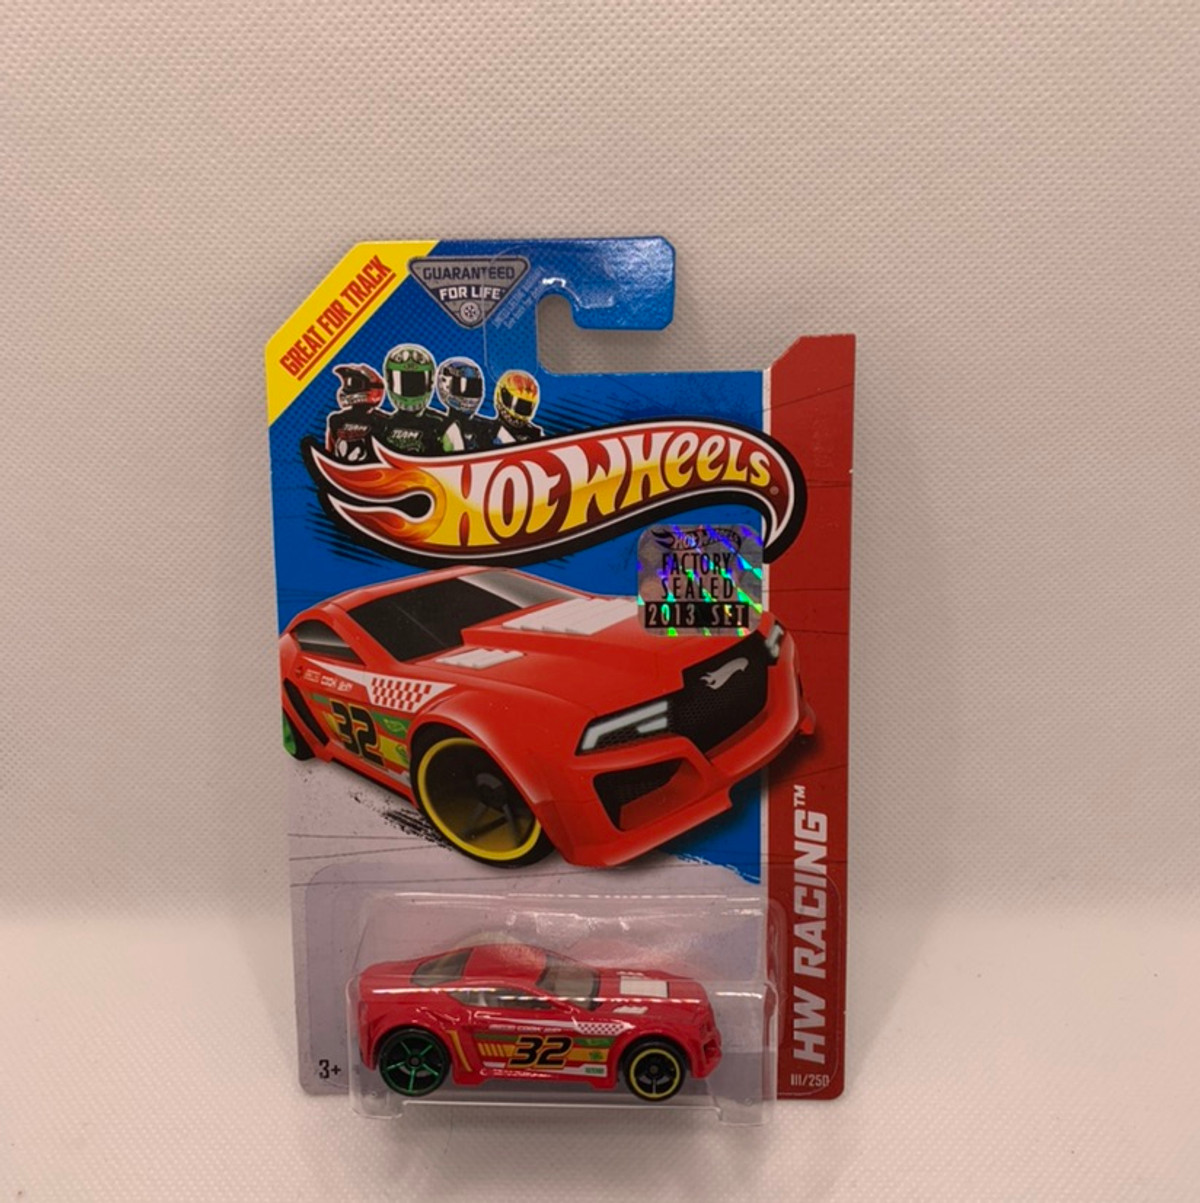 2013 Hot wheels Torque Twister Red Version With Factory Set Sticker 